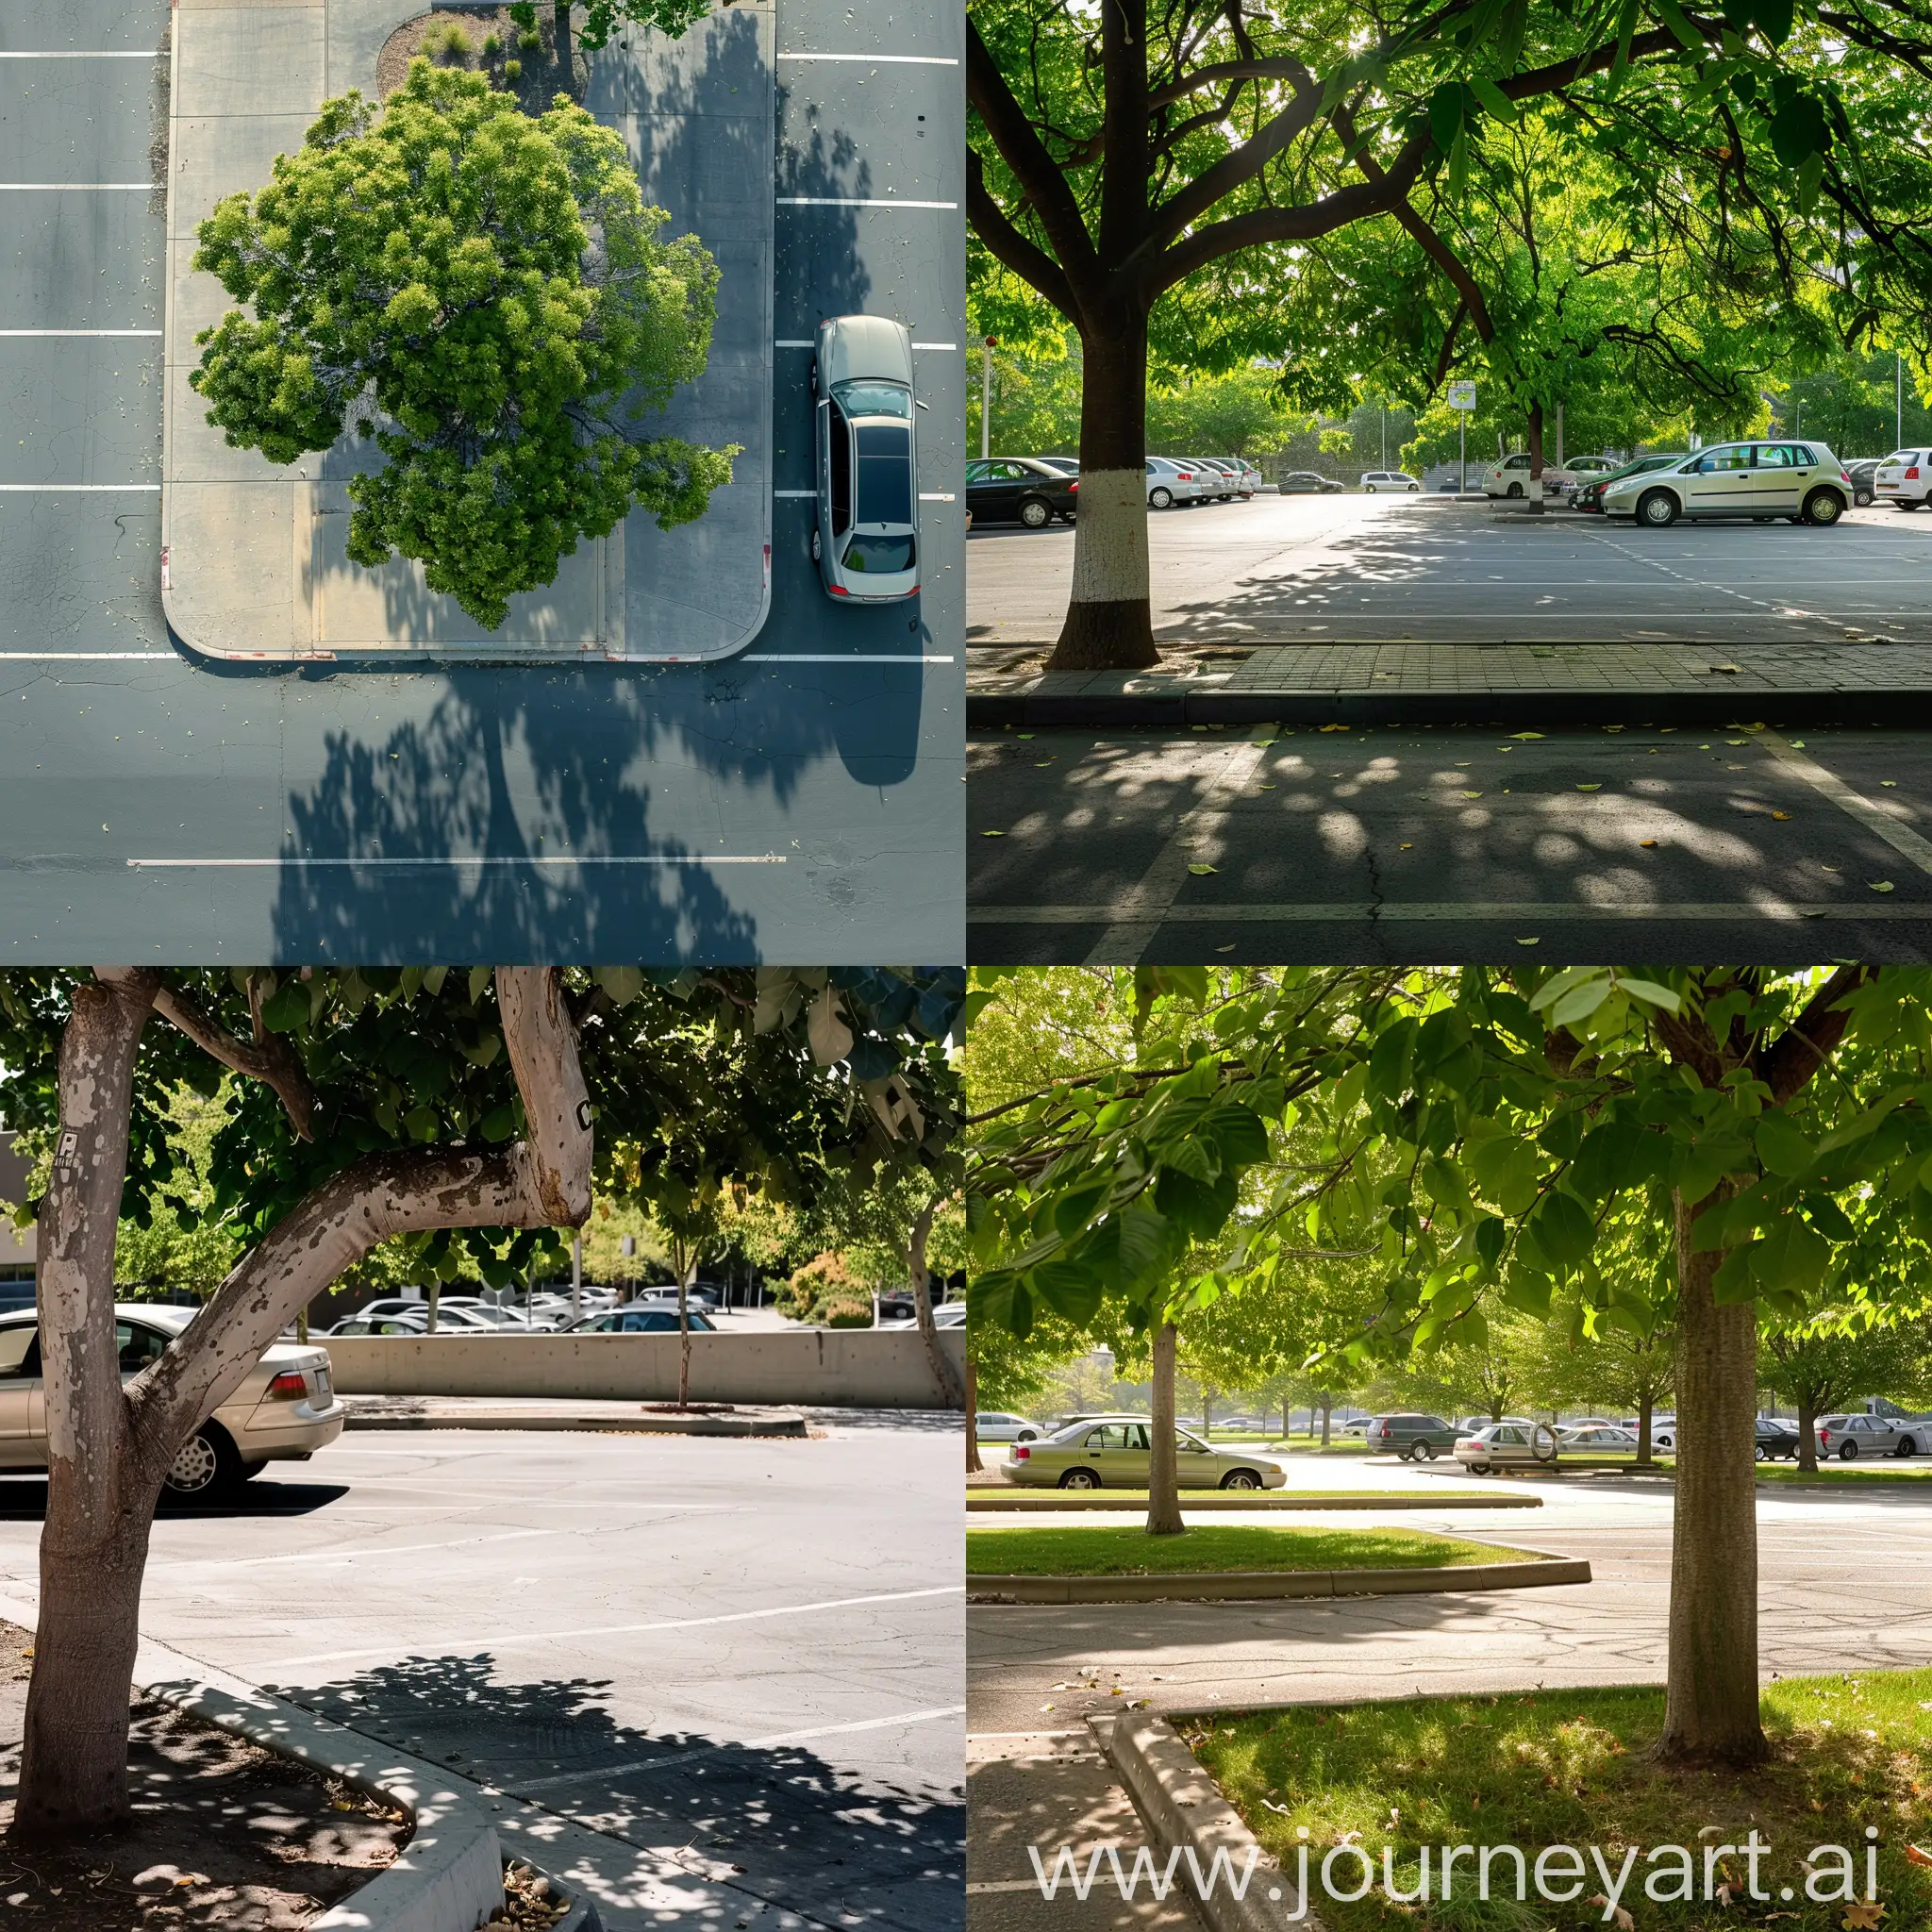 Car parking lot with shaded tree, curb and level details